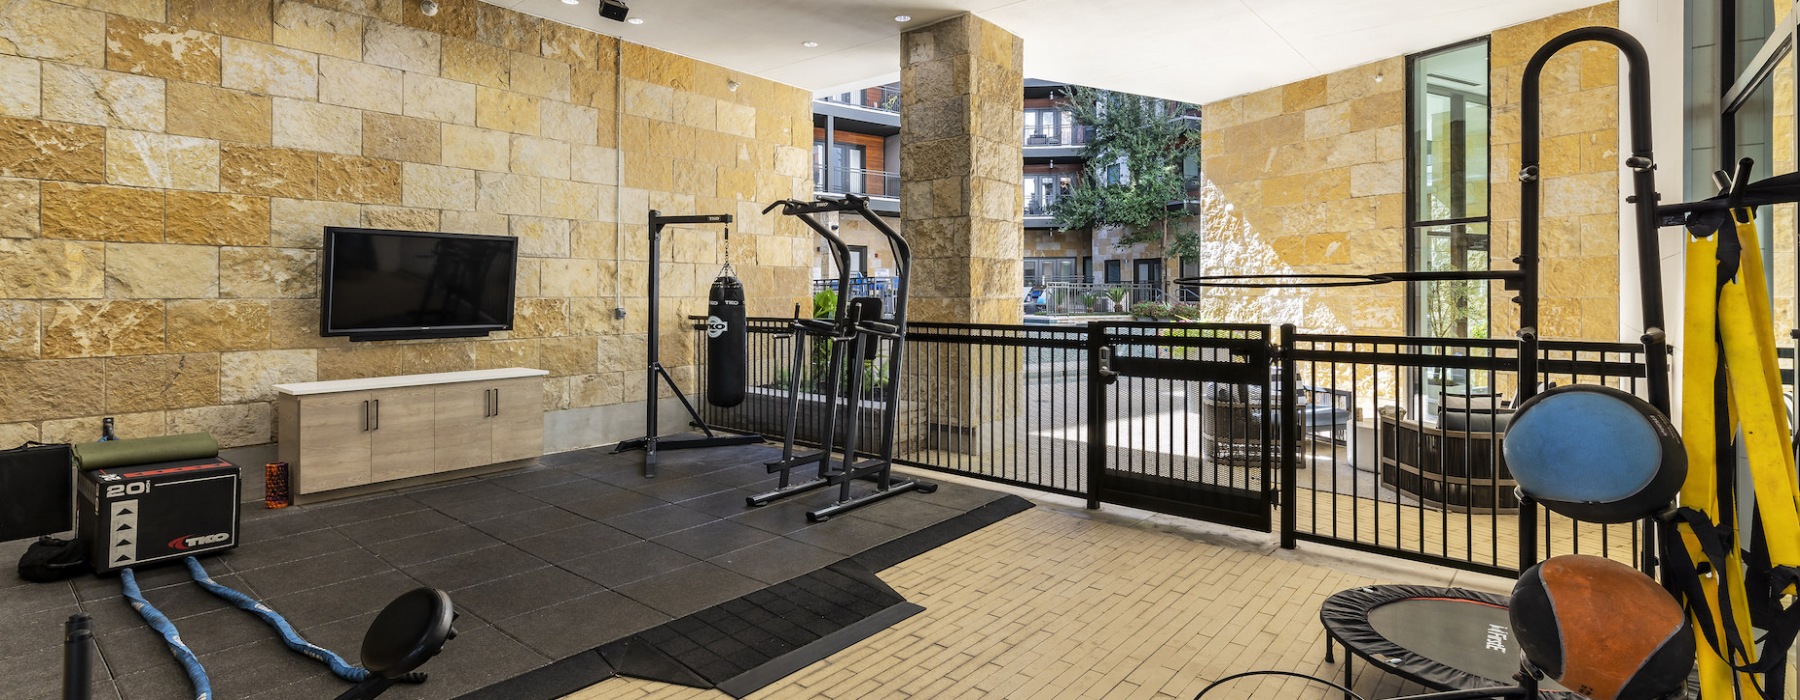 Outdoor fitness studio at The Kenzie at The Domain